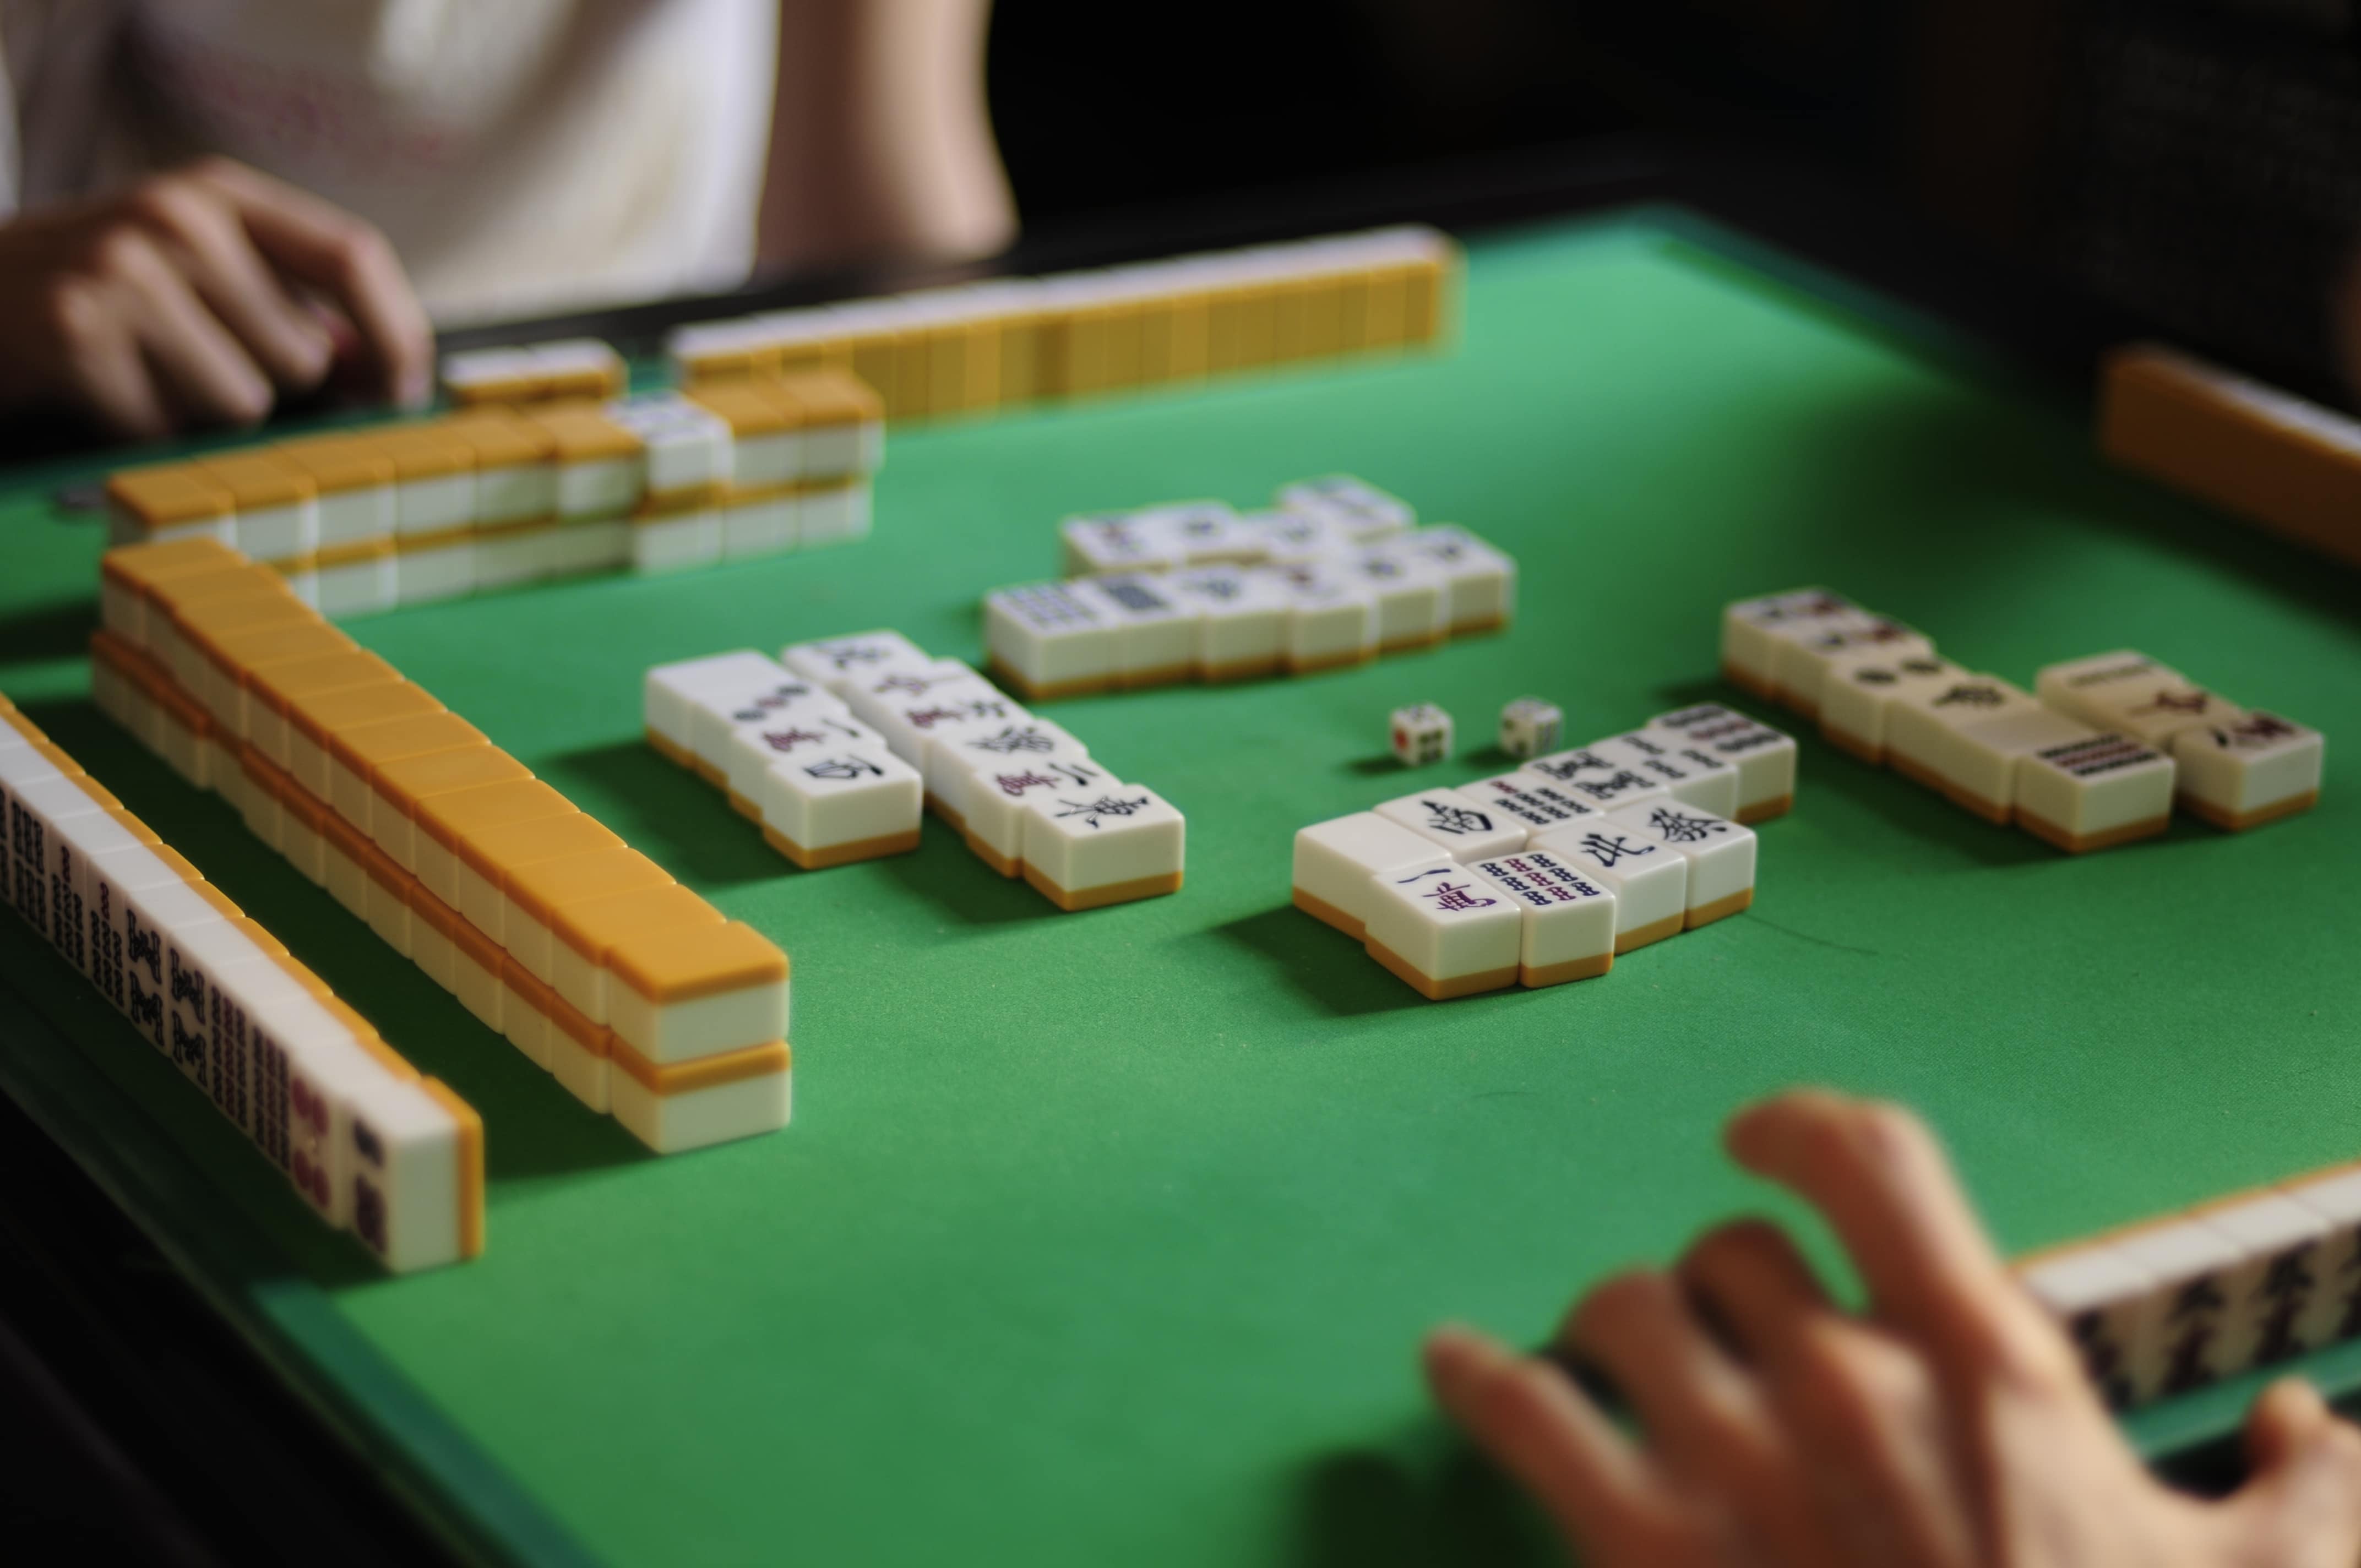 Splurge: Play in style with this RM16,000 Prada leather mahjong set